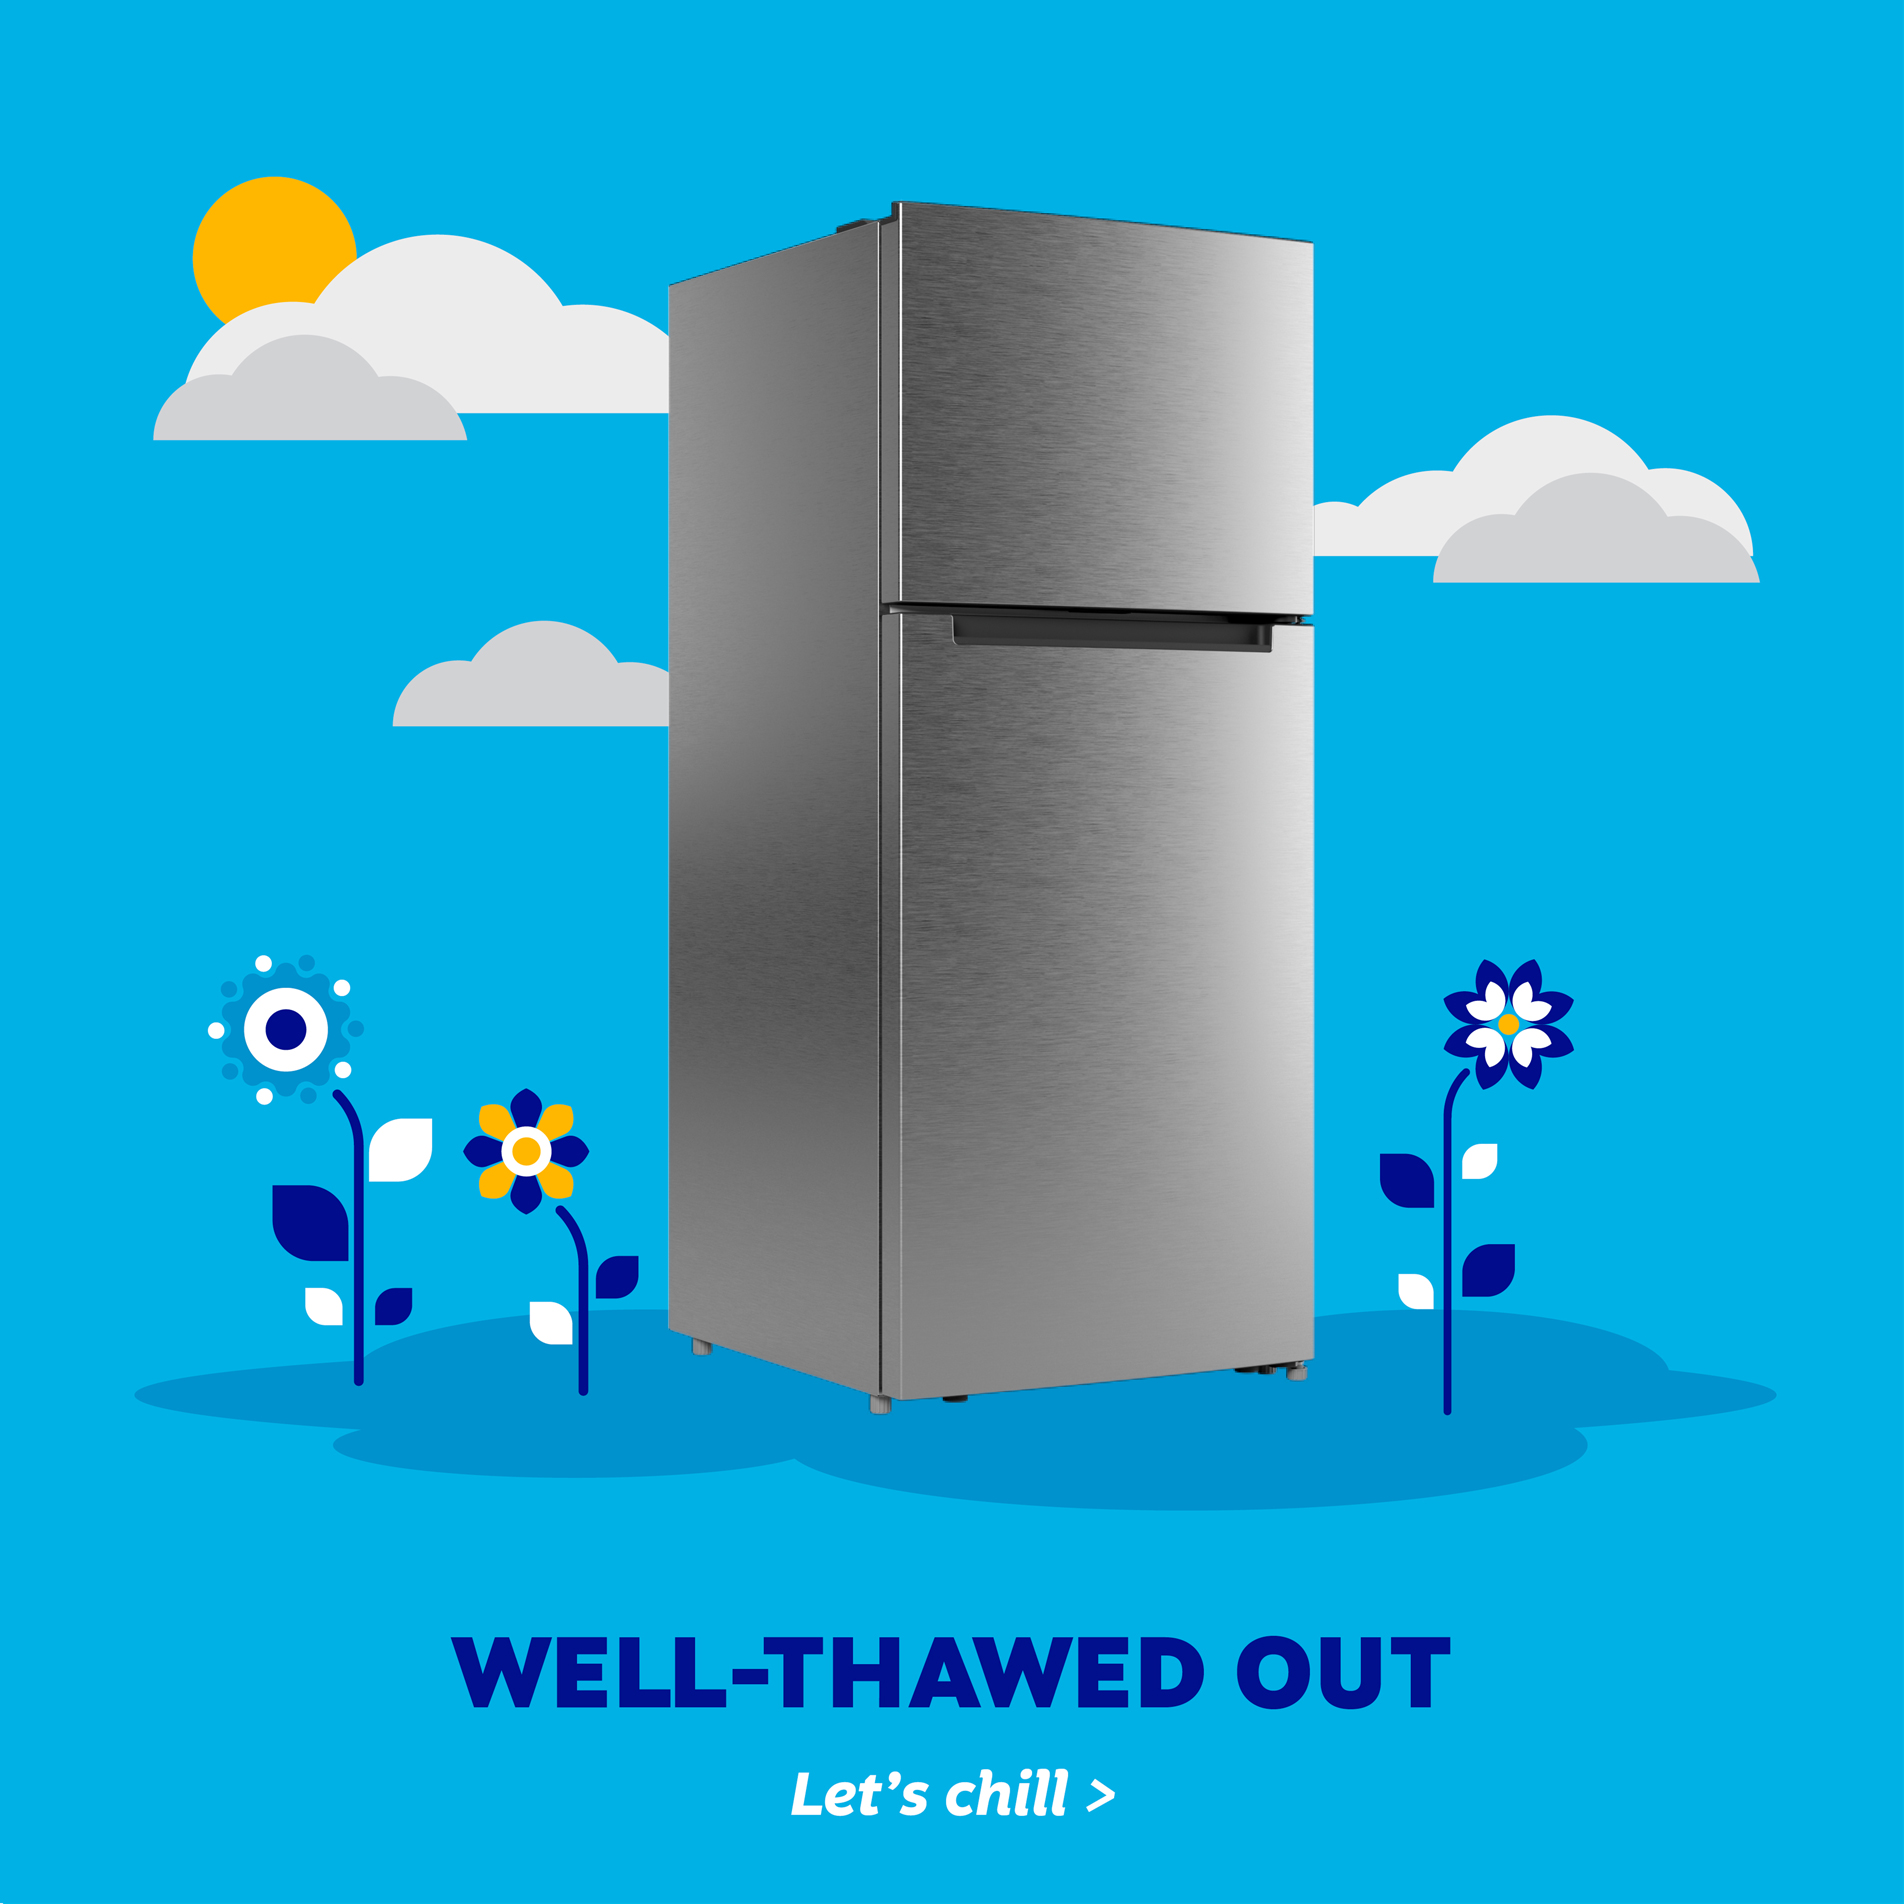 Image of a top mount stainless-steel refrigerator with clouds and flowers surrounding it and text "well-thawed out"